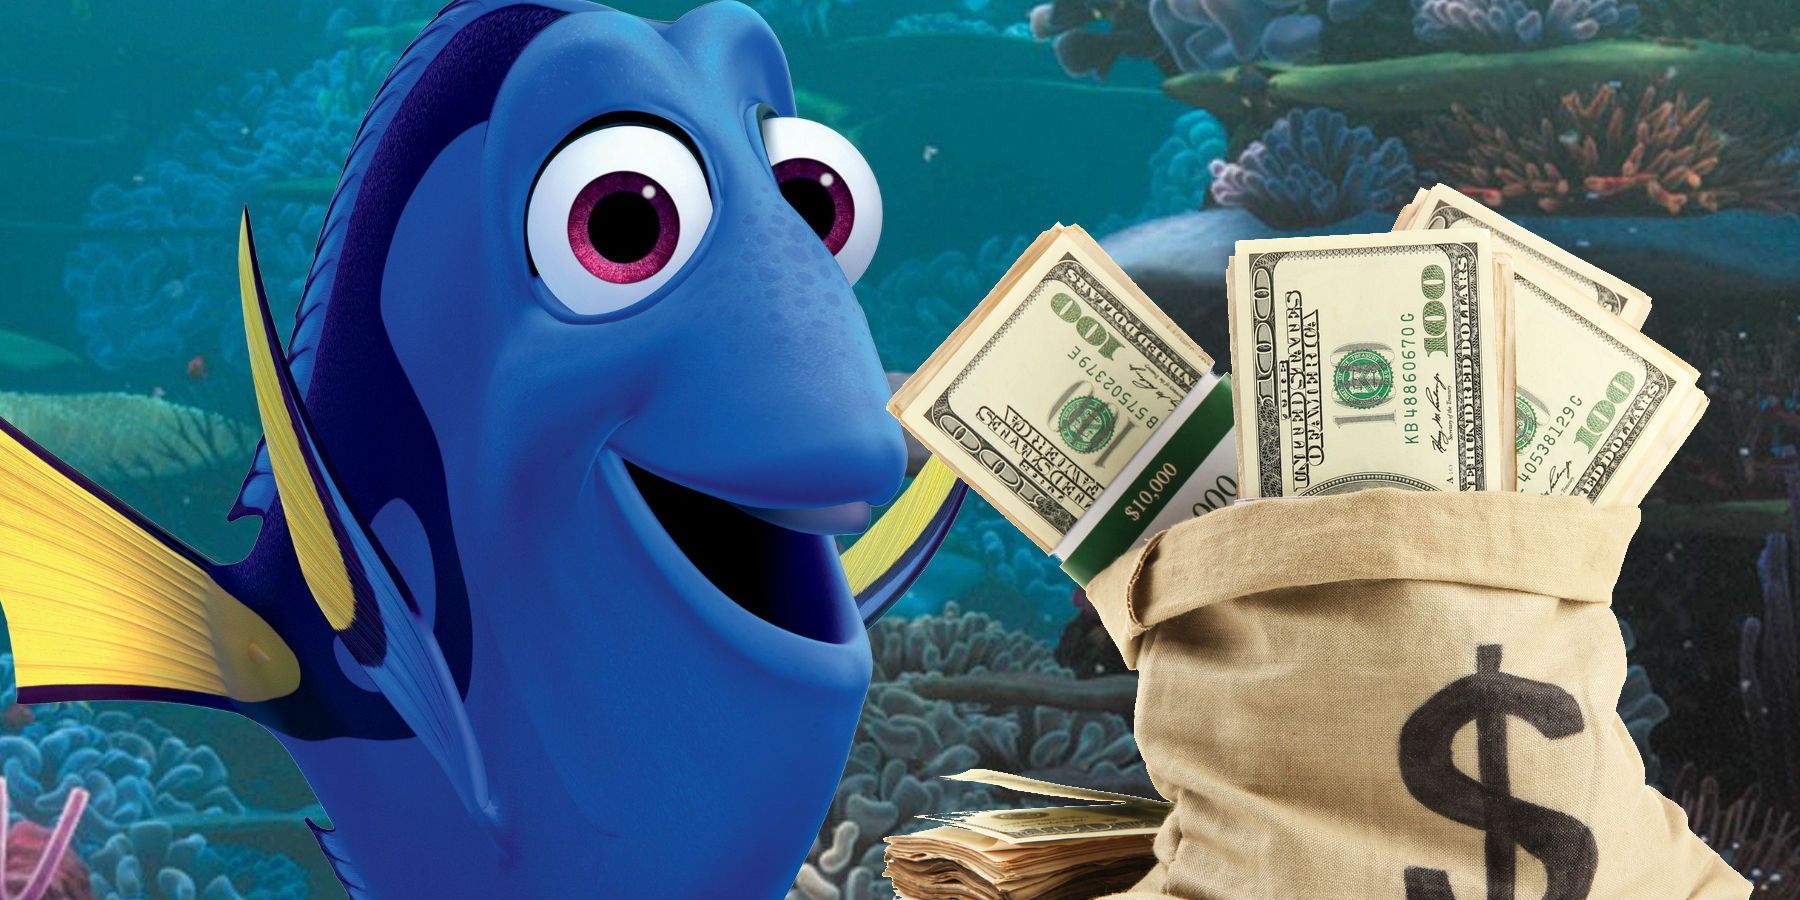 Finding Dory box office projection